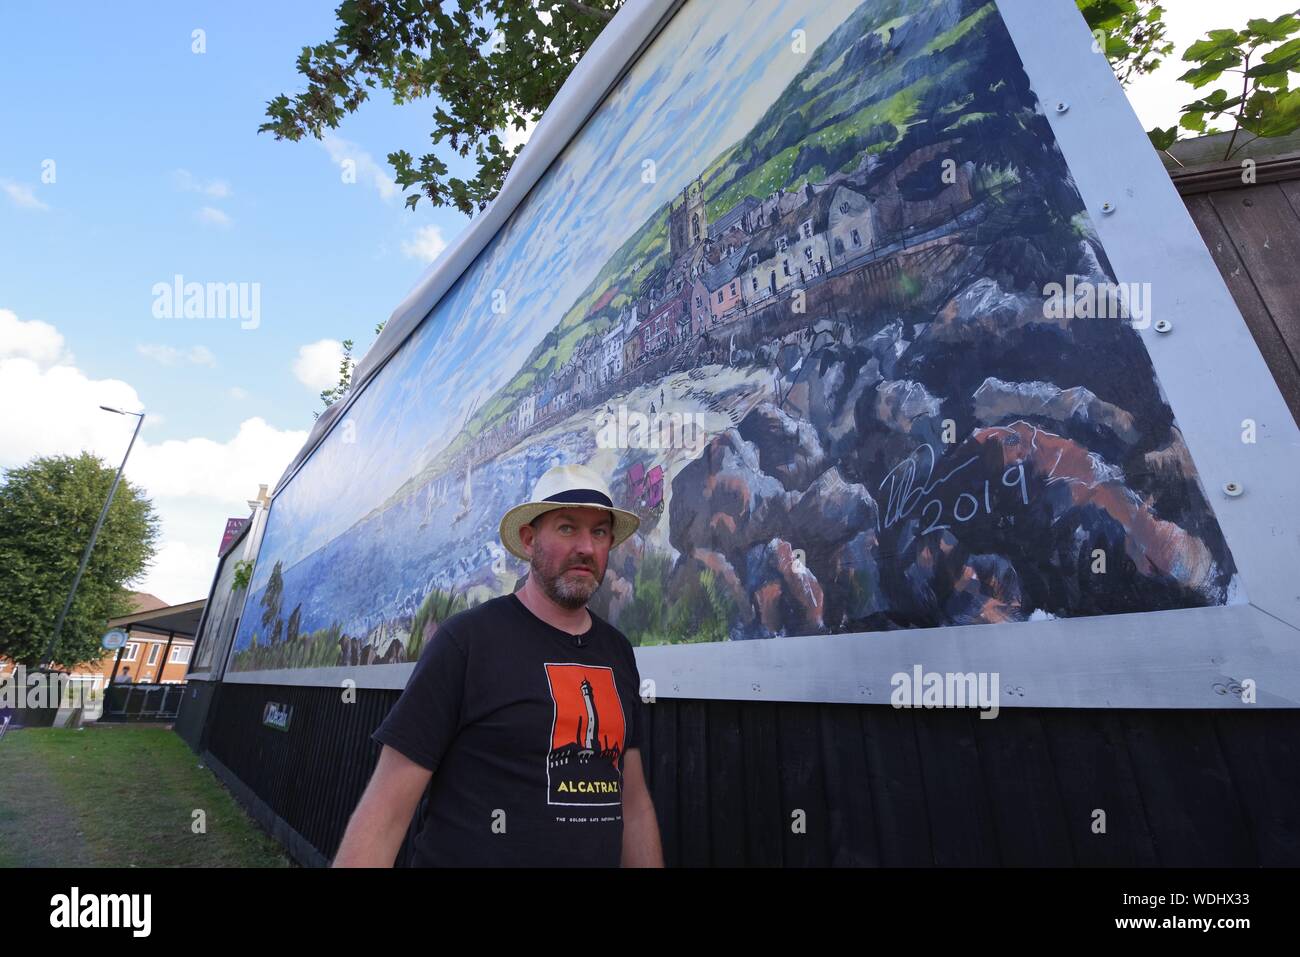 British artist David Downes has been commissioned by ITV to create a large-scale public mural in Bournemouth in conjunction with the  launch of their 2019 drama Sanditon in August 2019. Painting publicly for 5 days, and here on day 5, Downes is recreating an illustrated version of the poster artwork for Sanditon, on a giant billboard in the UK’s coastal town, to reﬂect the seaside location of the drama. The installation will remain in situ for three weeks after its completion.   David Downes is a landscape painter who ampliﬁes the sense of place and time through the lens of autism. Stock Photo